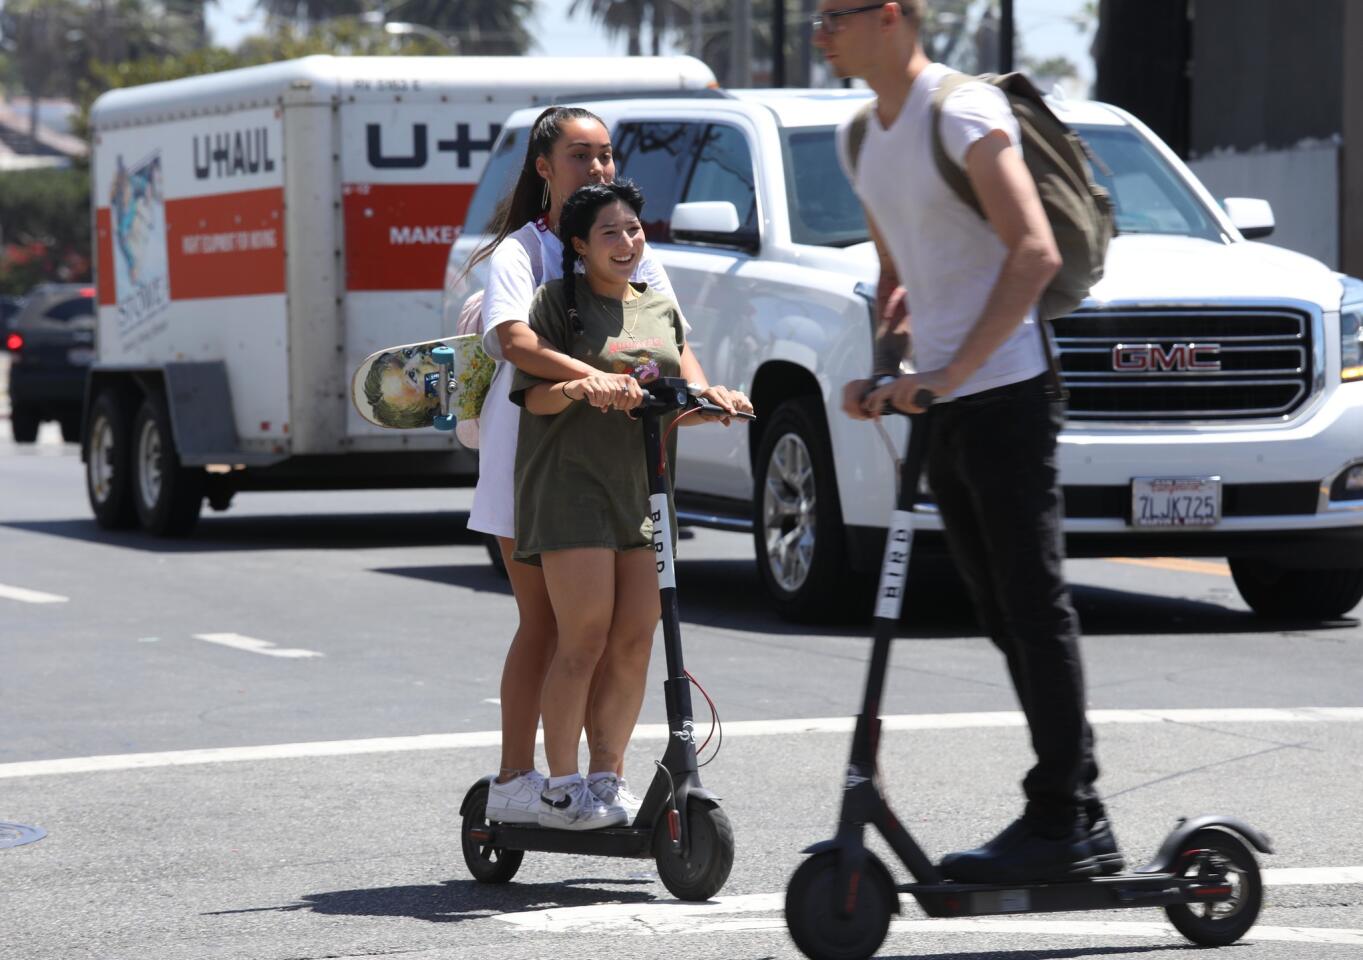 Girls ride across Pacific Avenue on a single Bird scooter as another Bird rider crosses their path in Venice on July 5, 2018. Double riders and riding without helmets are illegal when using the Bird scooter. According to the Bird rental agreement, riders must be 18 years old to operate the scooters.